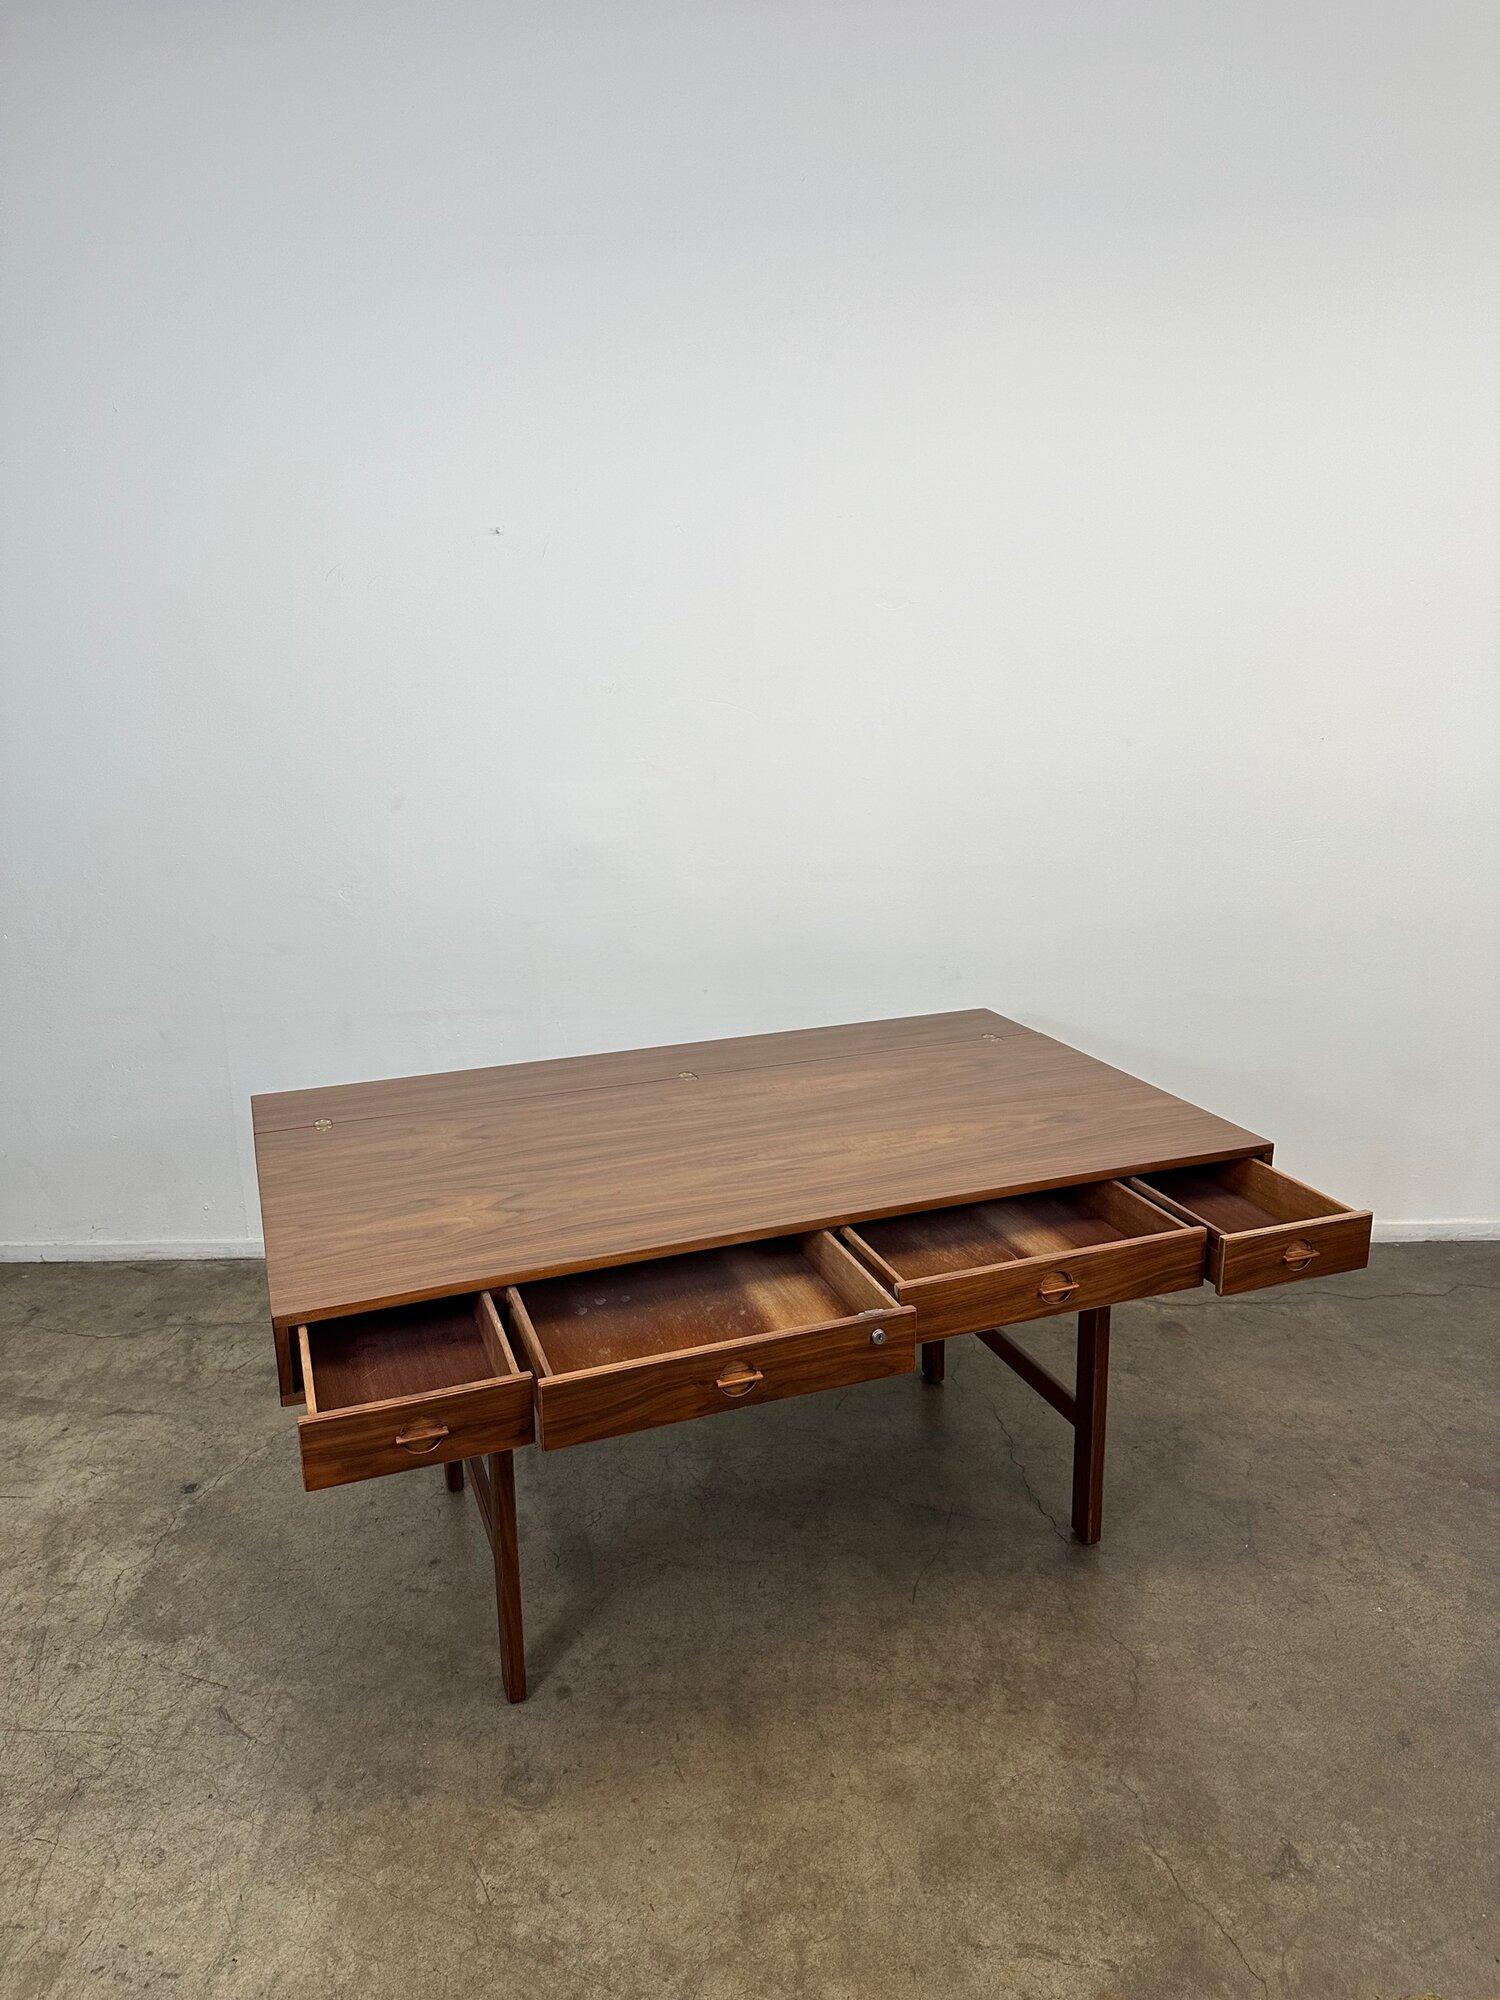 W64 D28.75 D38 H29 KC23.5

Spectacular teak desk designed and crafted by Peter Løvig Nielsen in Denmark circa 1970's. Its ingenious design makes it versatile in accommodating two-persons on each side by simply flipping the top shelf and their is